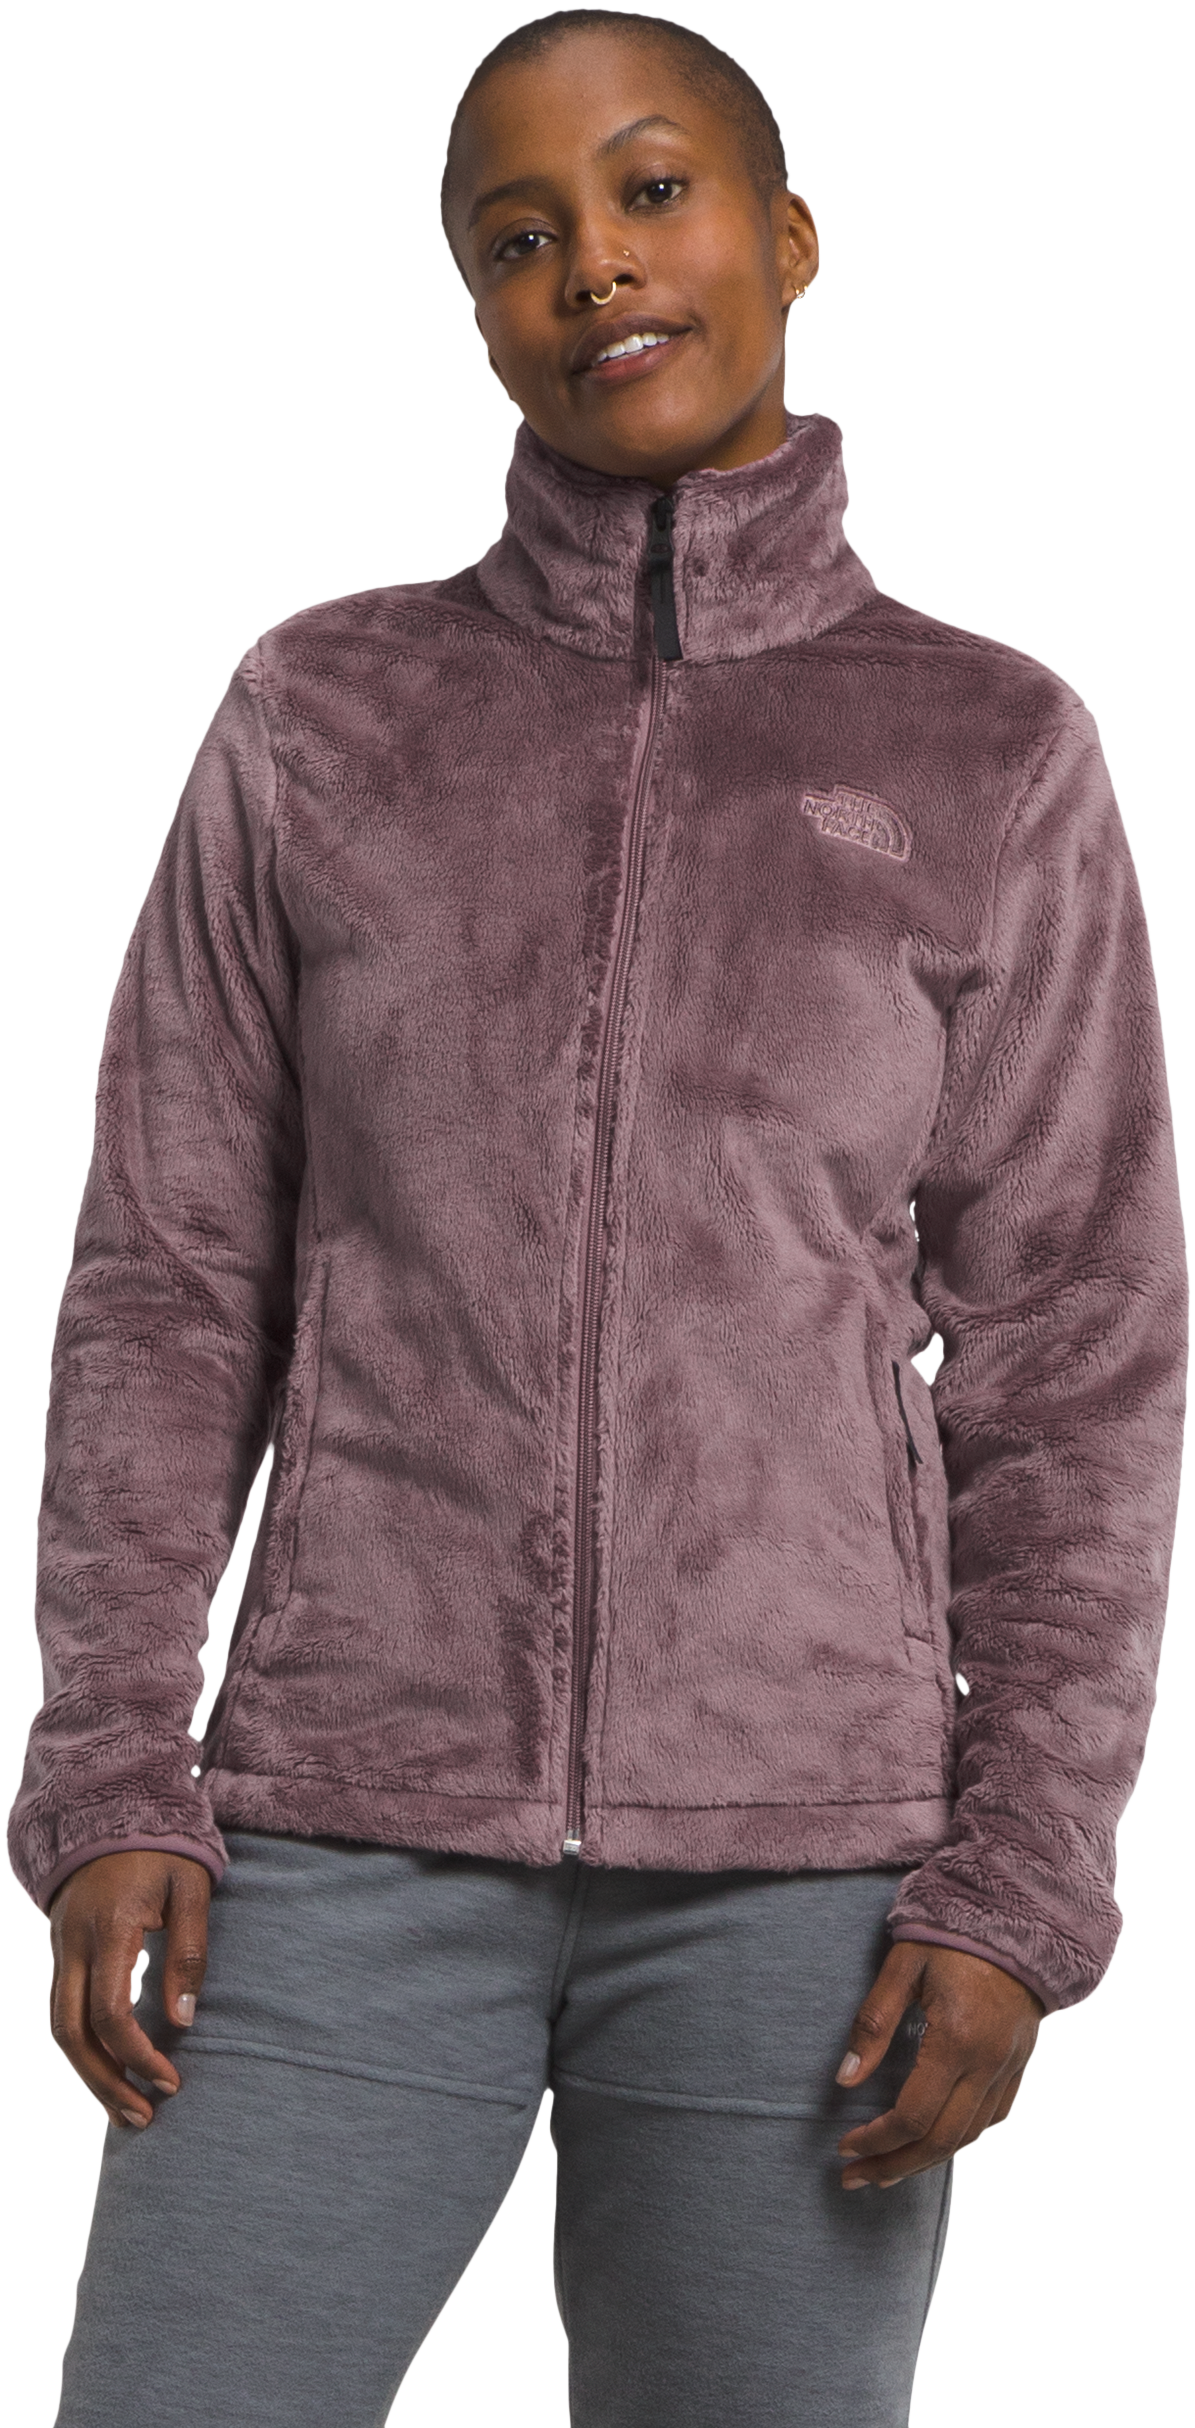 The North Face Osito Jacket for Ladies - Fawn Grey - L